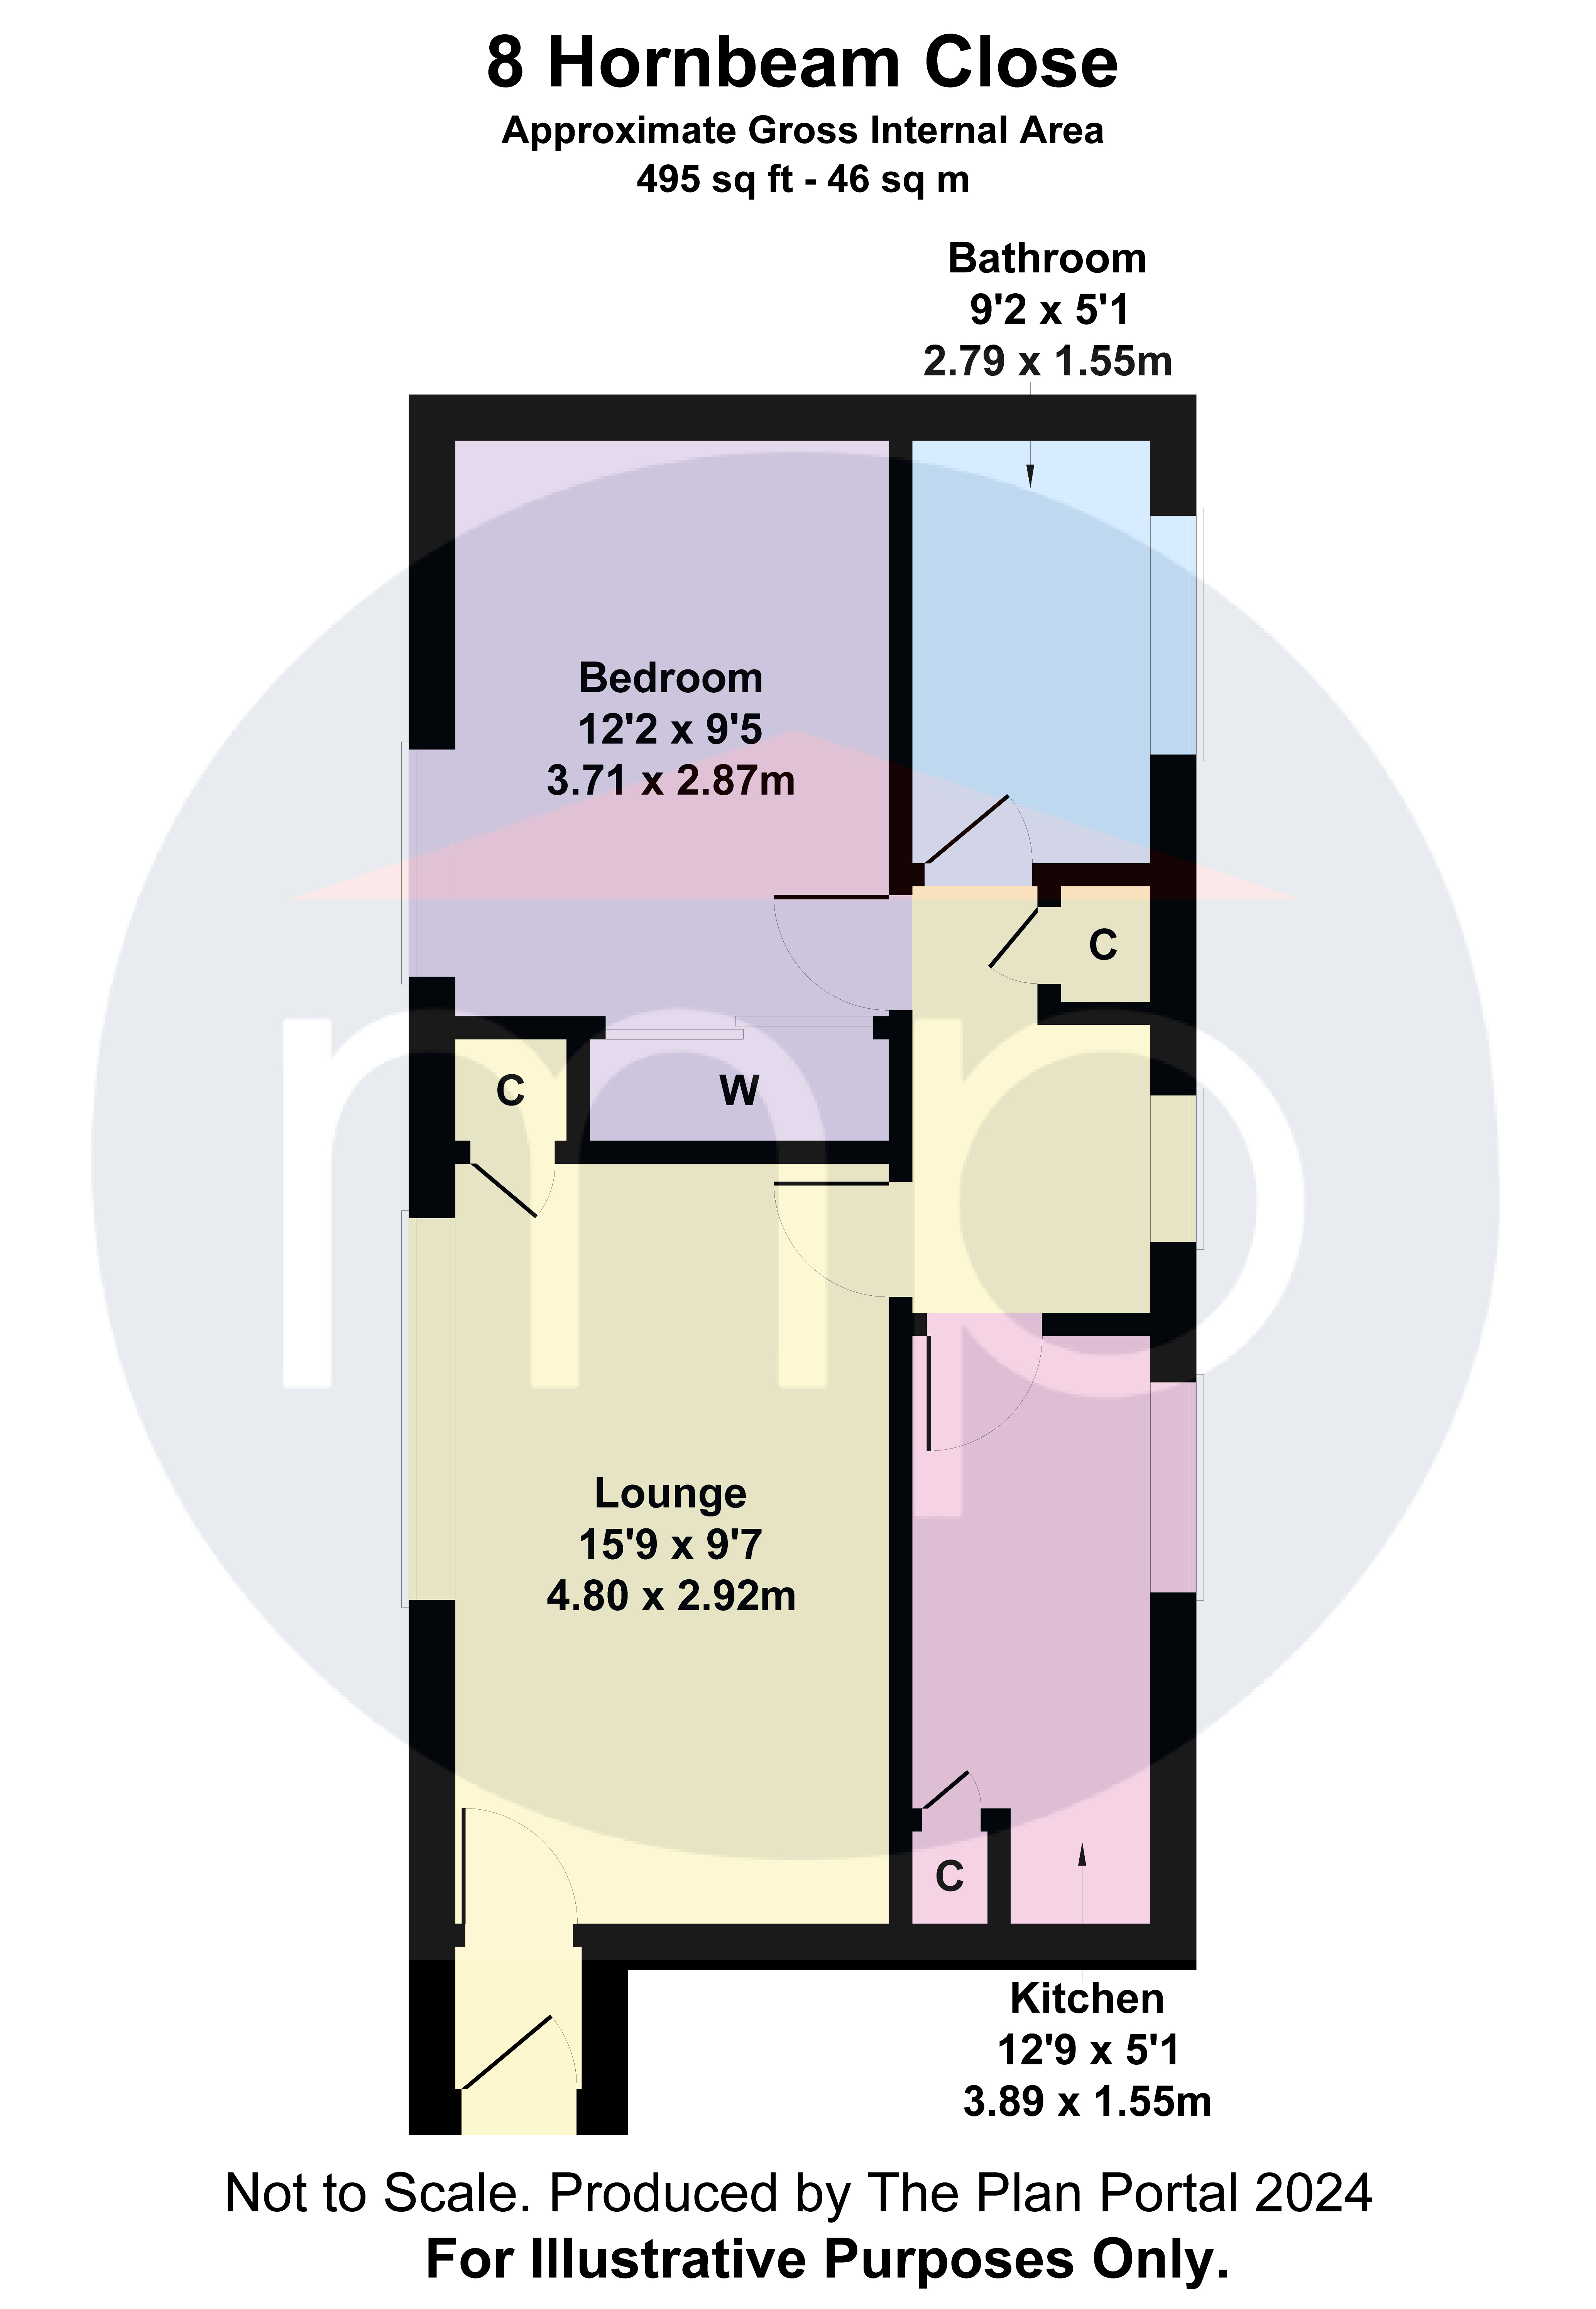 1 bed apartment for sale in Hornbeam Close, Ormesby - Property floorplan